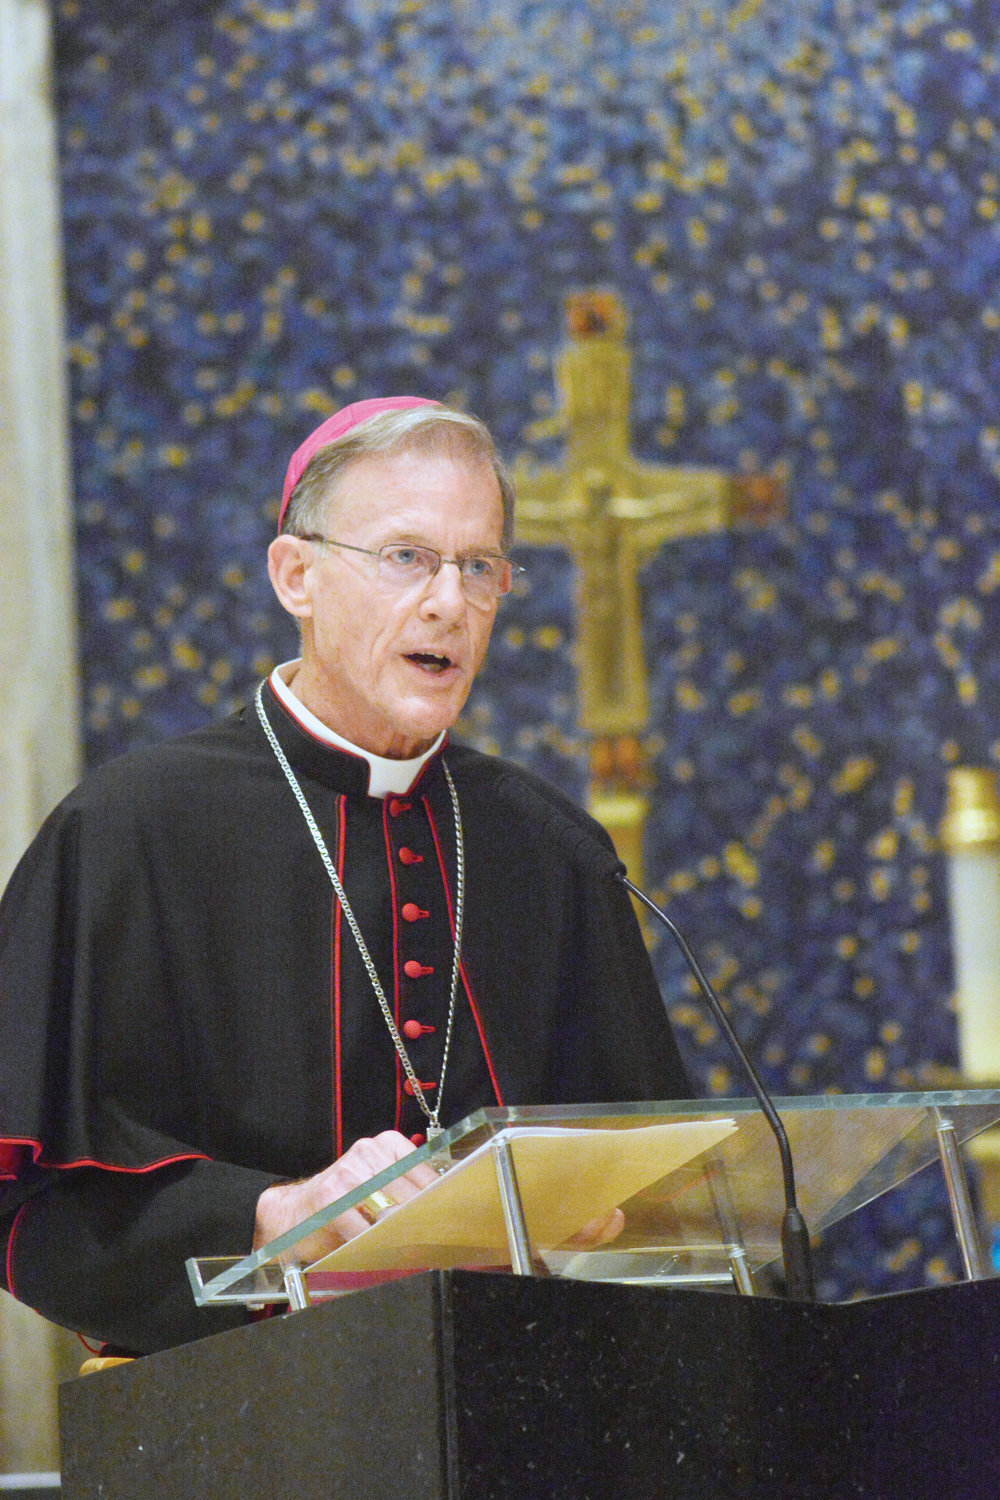 Archbishop John Wester of Santa Fe, N.M., during his Sept. 12 reflection at the United Nations Annual Prayer Service at Holy Family Church in Manhattan. In his urgent message for nuclear disarmament, Archbishop Wester noted that Christ said, “Peace be with you.”